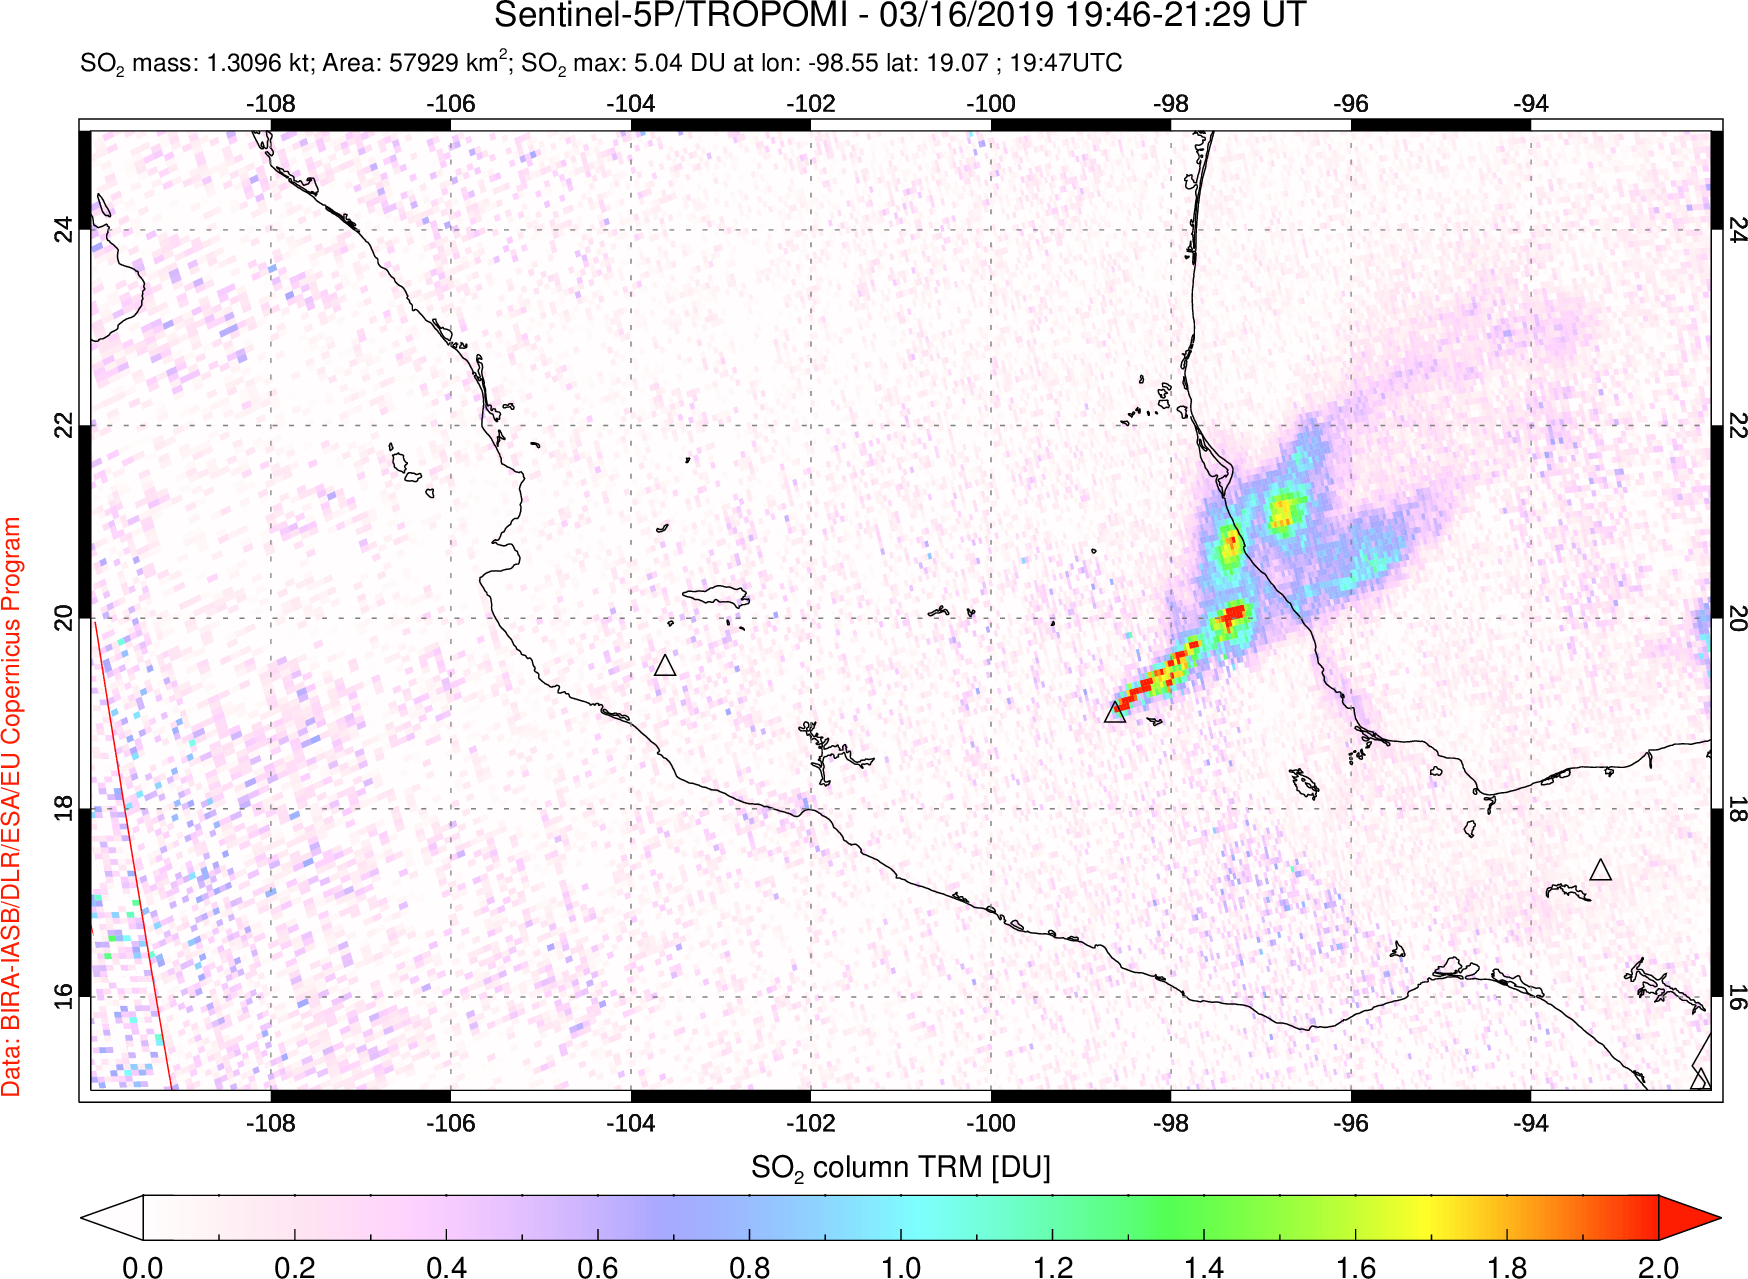 A sulfur dioxide image over Mexico on Mar 16, 2019.